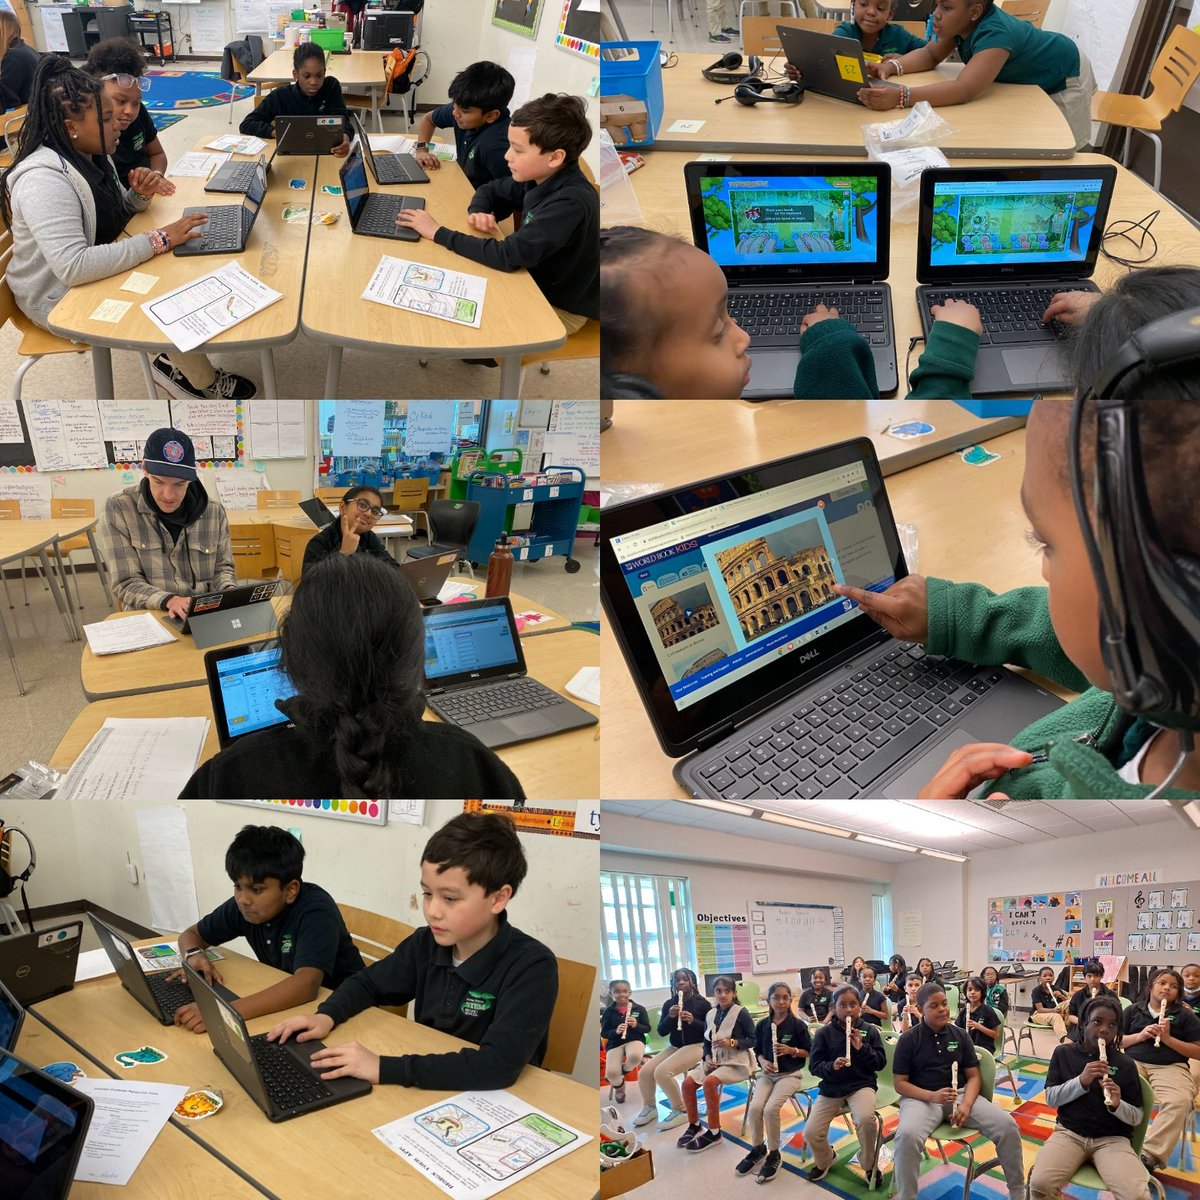 Our STEM musicians and coders were fully engaged and loving their essential arts classes! Shout out to our EA/STEM team for providing our kiddos awesome learning experiences! #stempride🌱 @STEMEdCT @msboratko @Hartford_Public @HPSArtsWellness @HartfordSuper @corinne_barney